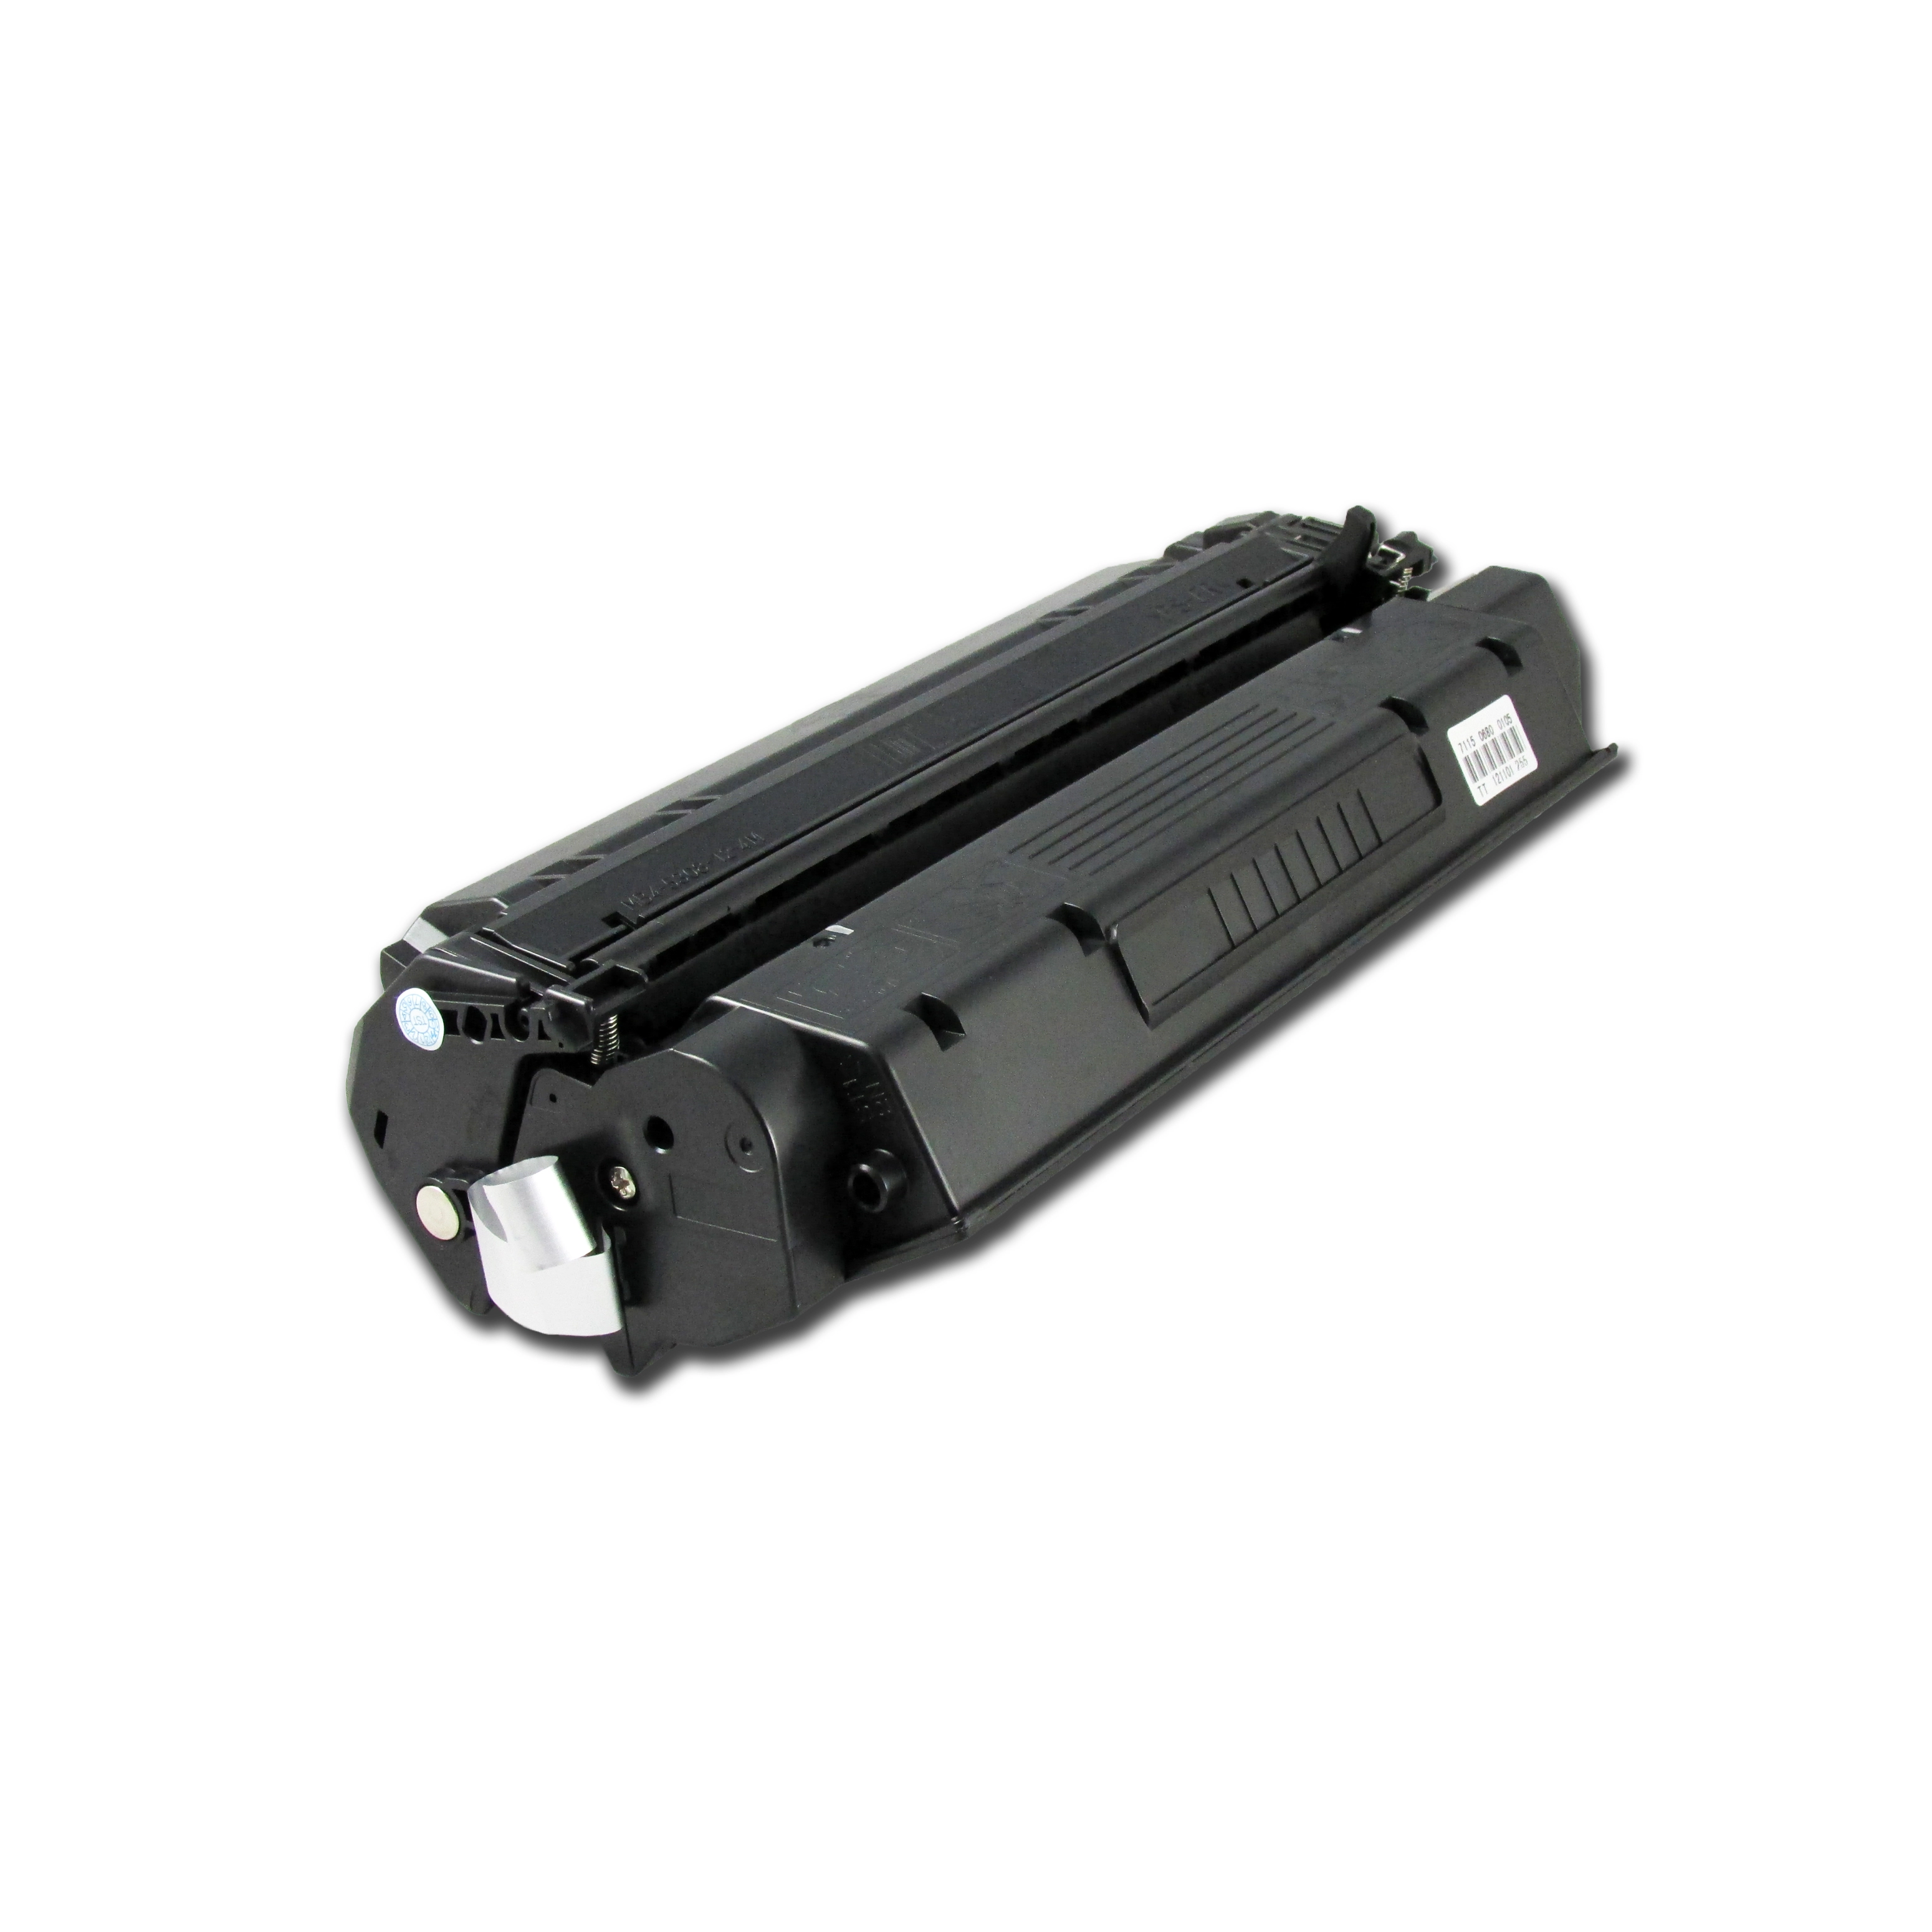 C7115A toner cartridge Use For 1000/1200/1220/3300